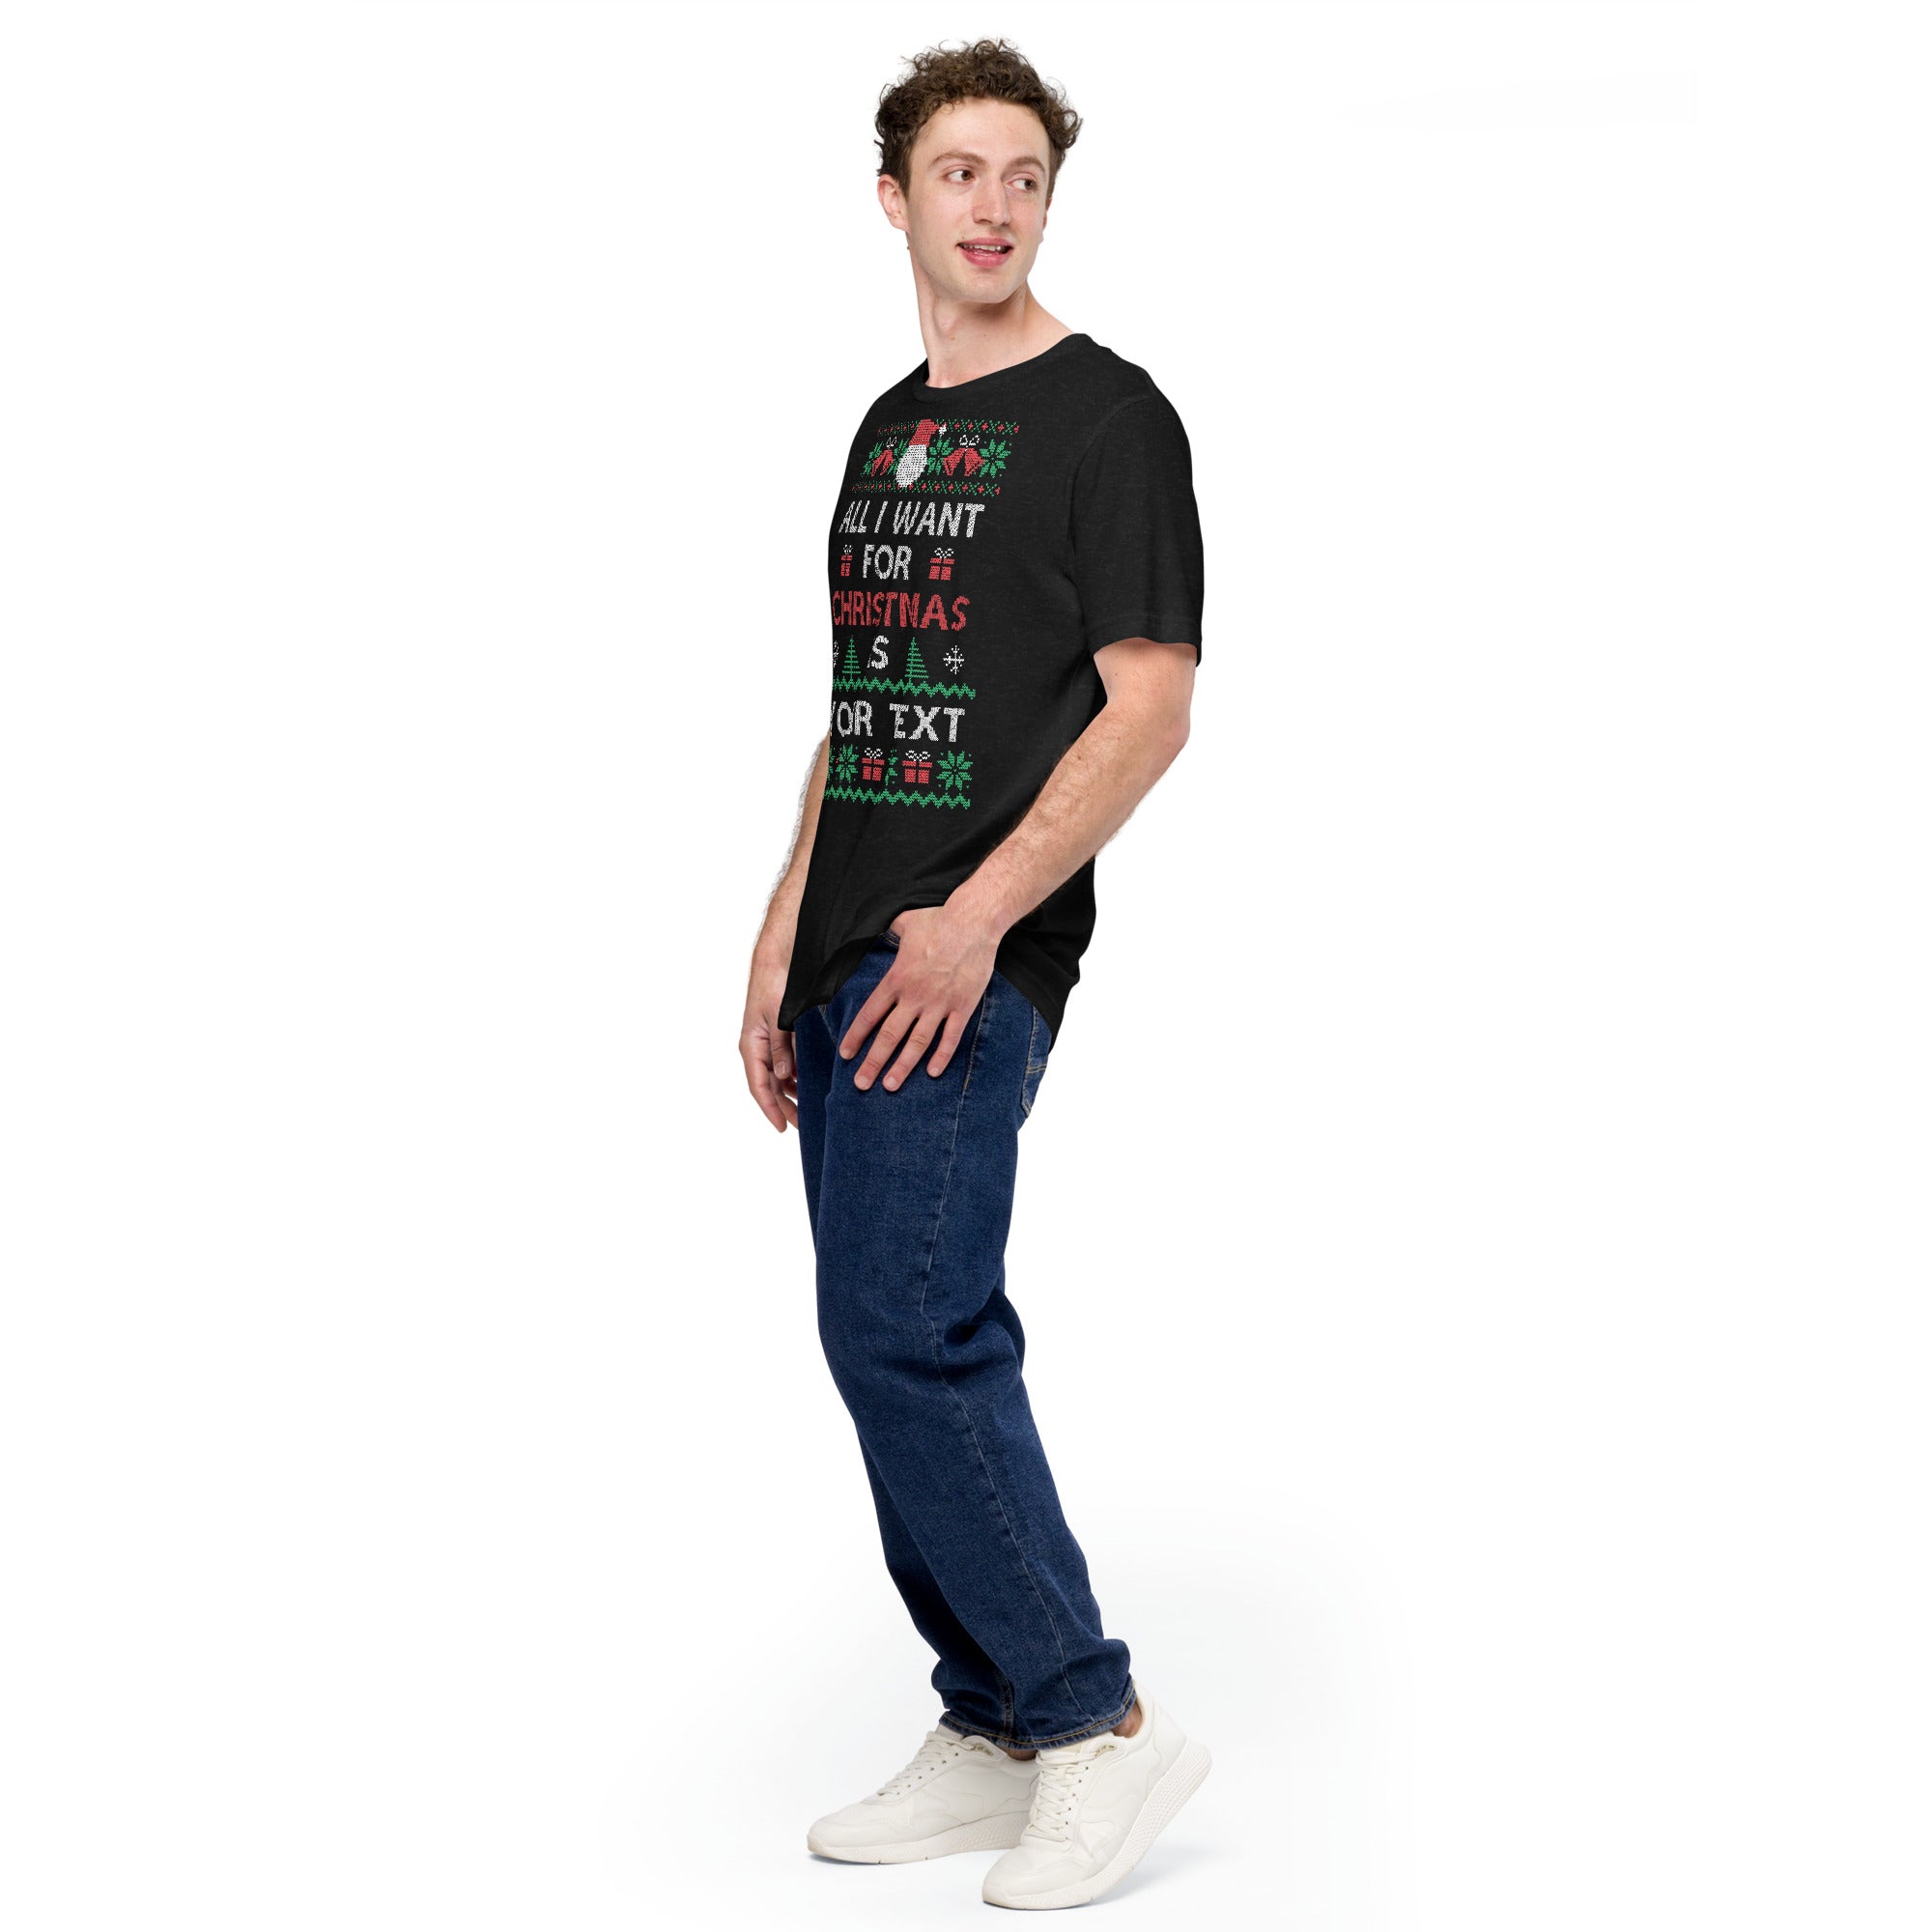 All I Want For Christmas Is Your Text Unisex t-shirt